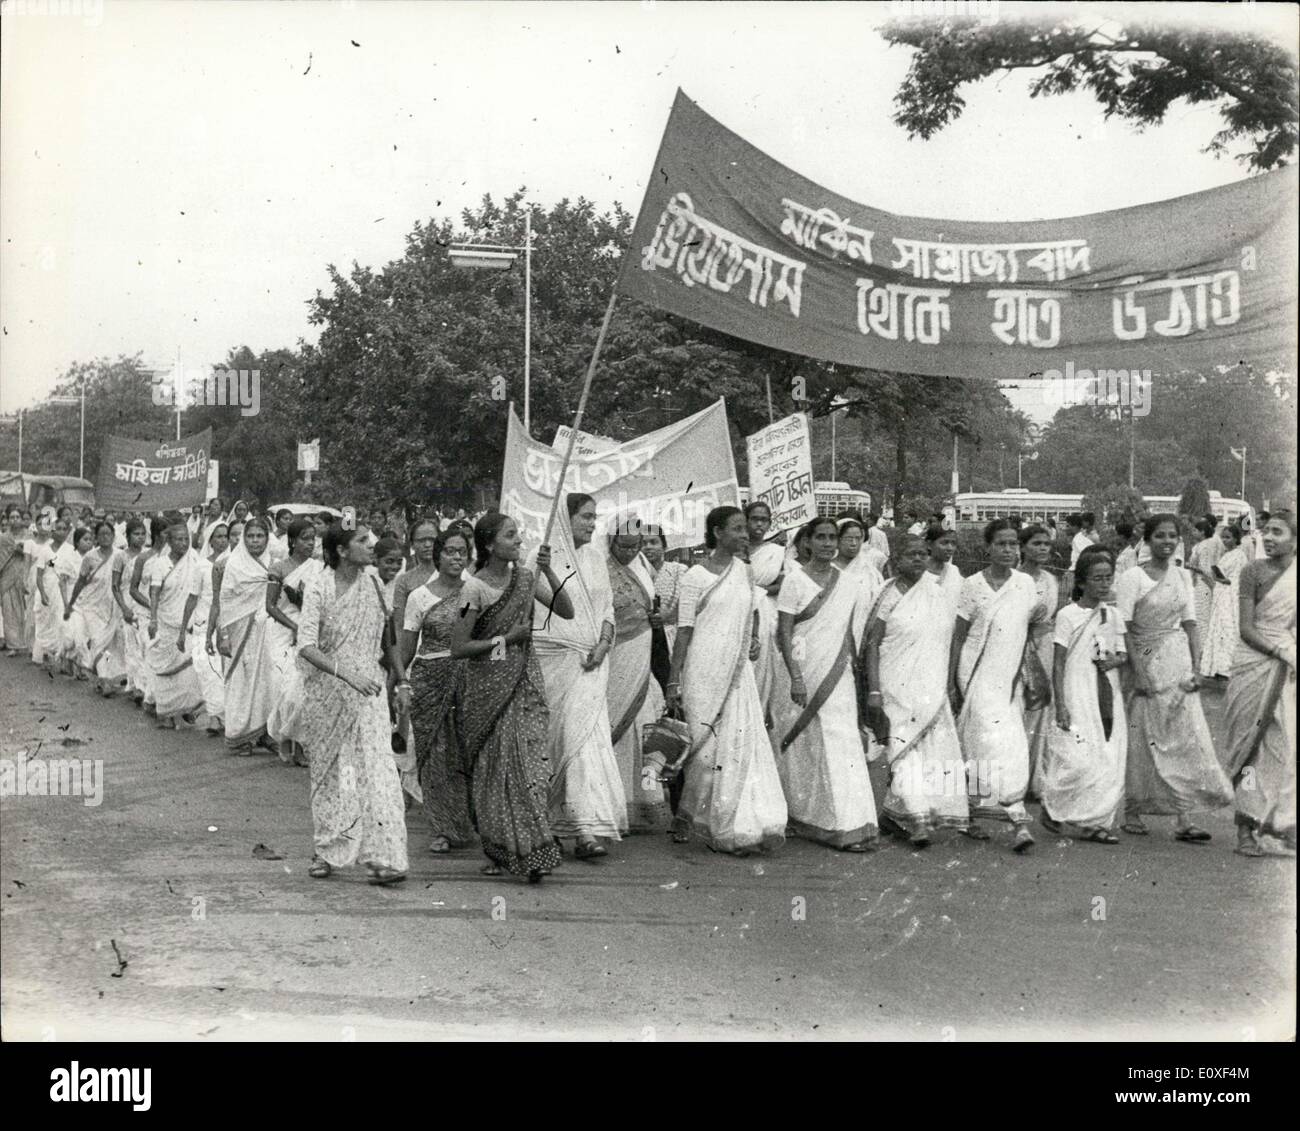 Jul. 25, 1966 - Women Demonstrate Against USA: In Calcutta, India, over 500 women - housewives, factory and office workers and students - led by a communists held a three hour demonstration in front of the United States Information Service library in Central Calcutta last Tuesday (July 19) condemning American bombing in North Vietnam and escalation of the Vietnam war. The women coming from different parts of the city and suburbs earlier held a rally in central Calcutta's parade ground Stock Photo